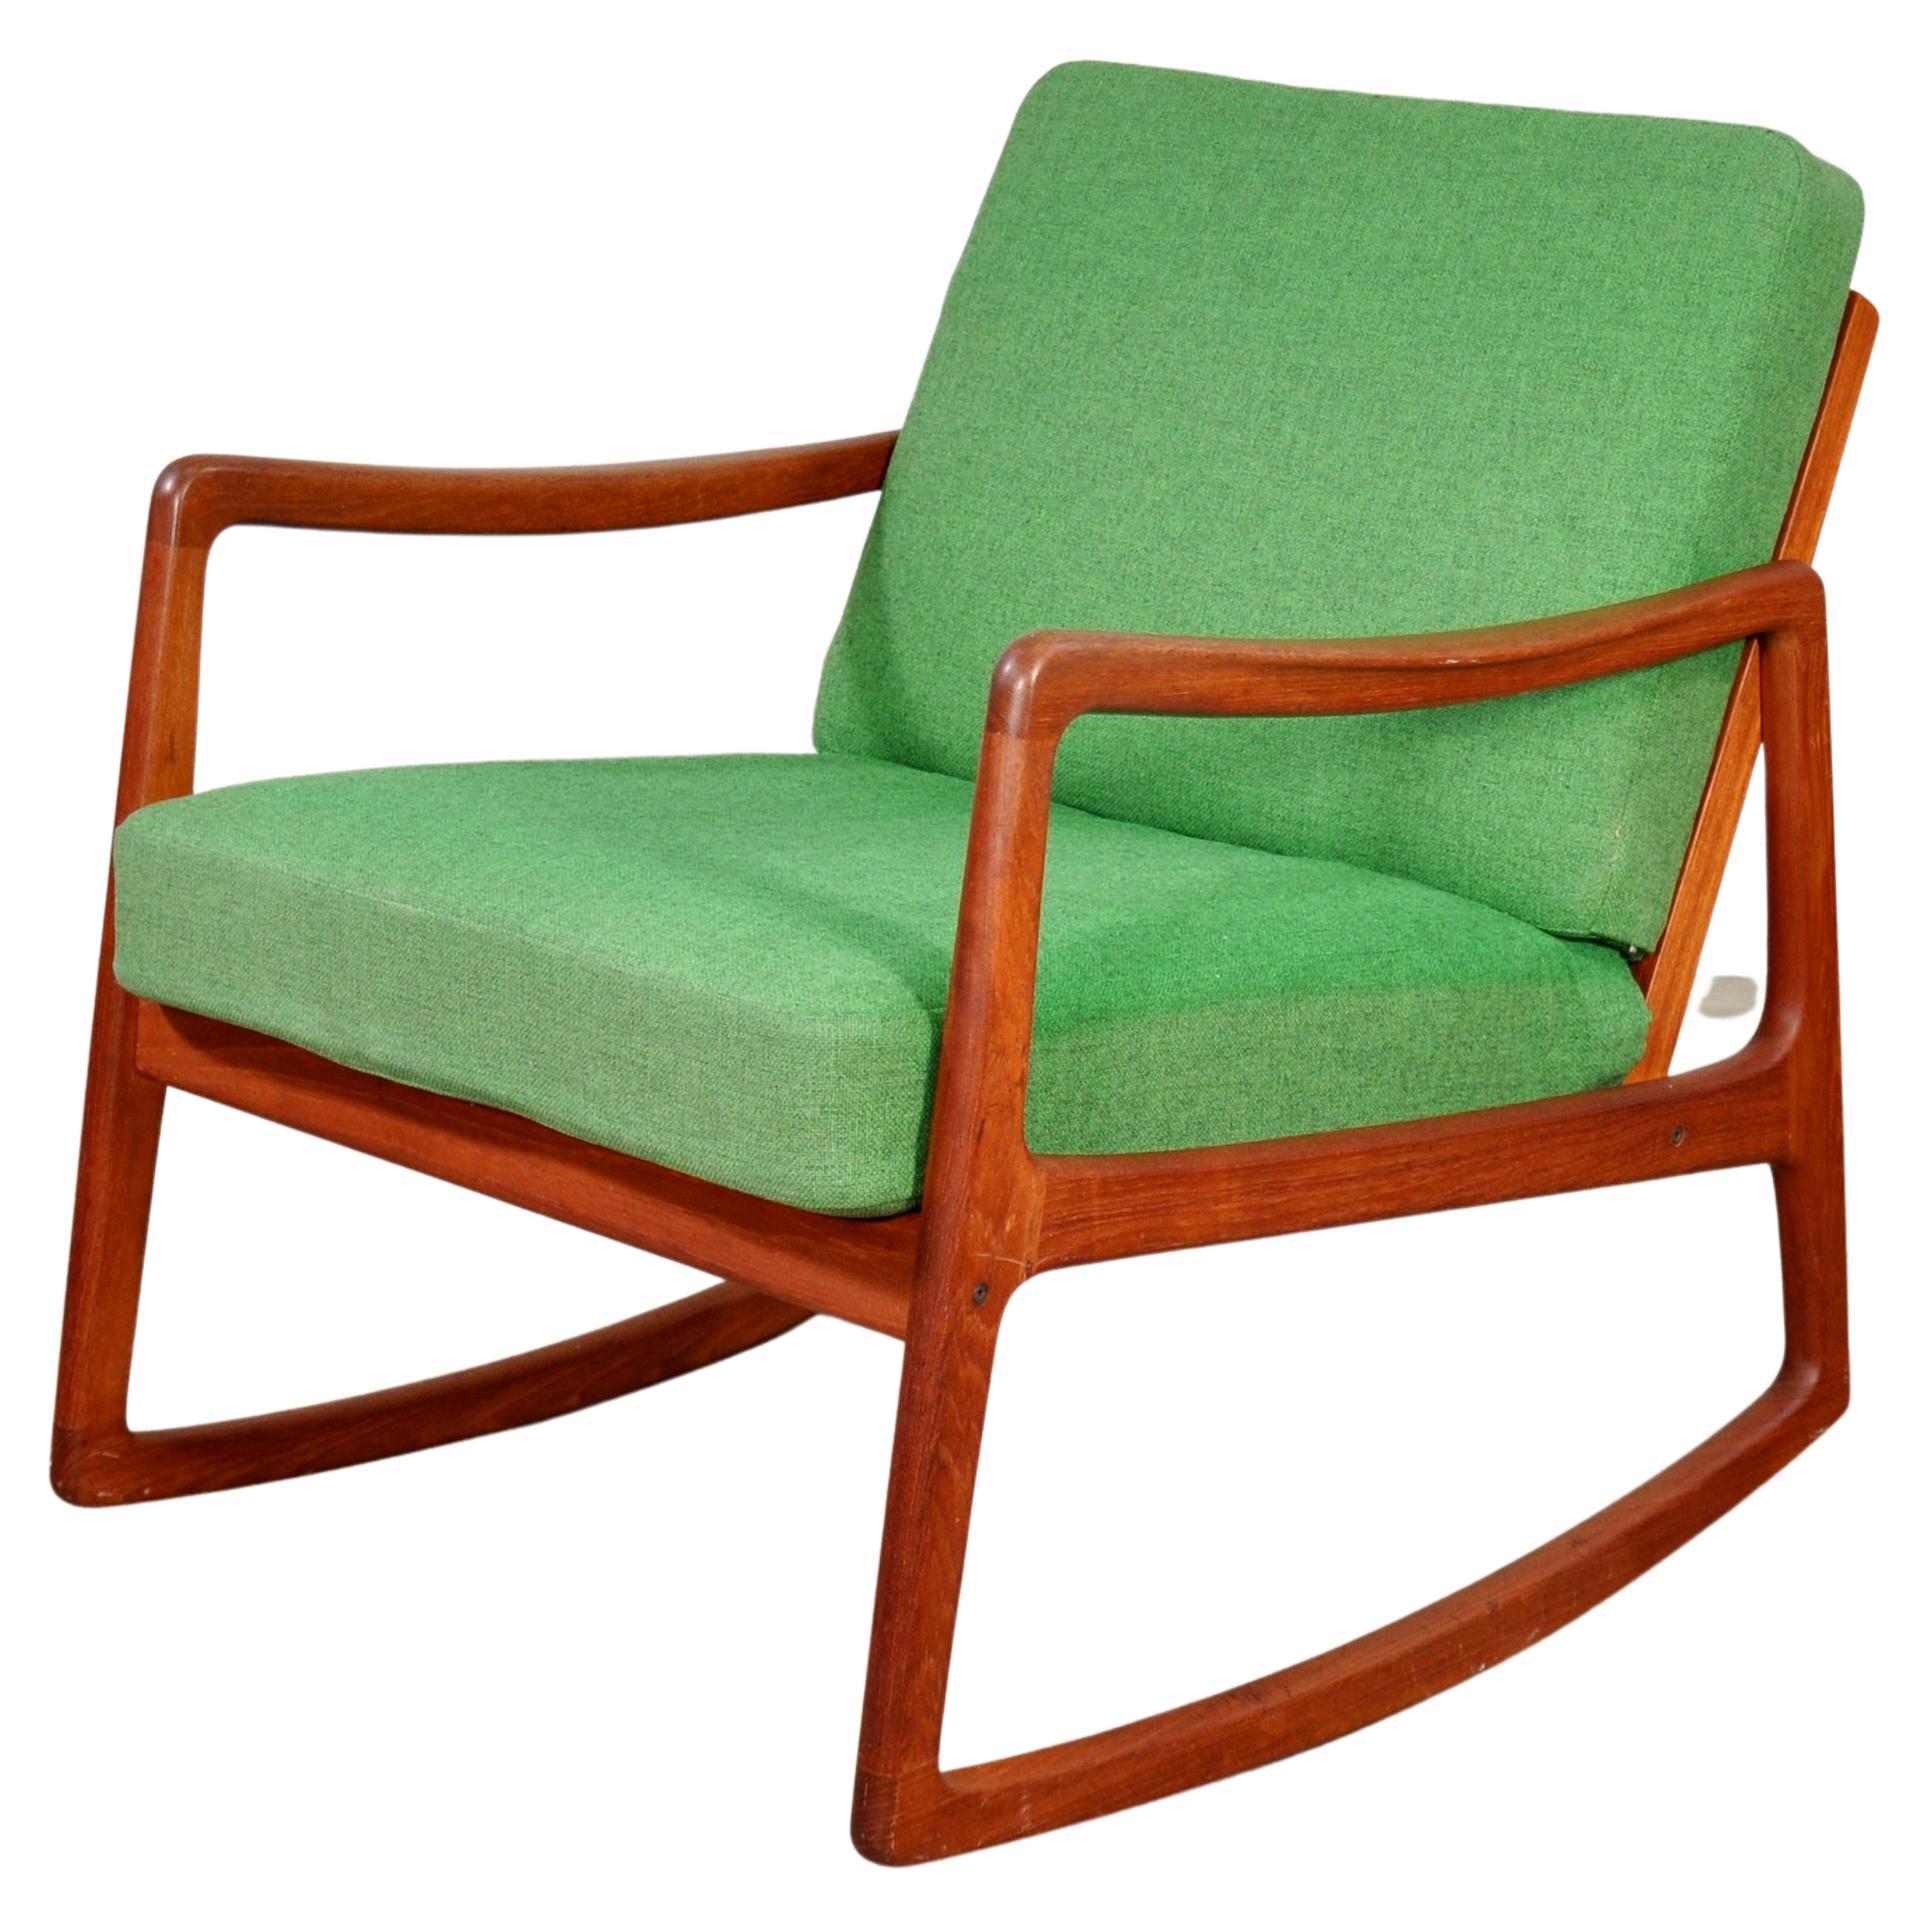 Mid-20th Century Ole Wanscher Model FD-120 Rocking Chair for France & Søn For Sale